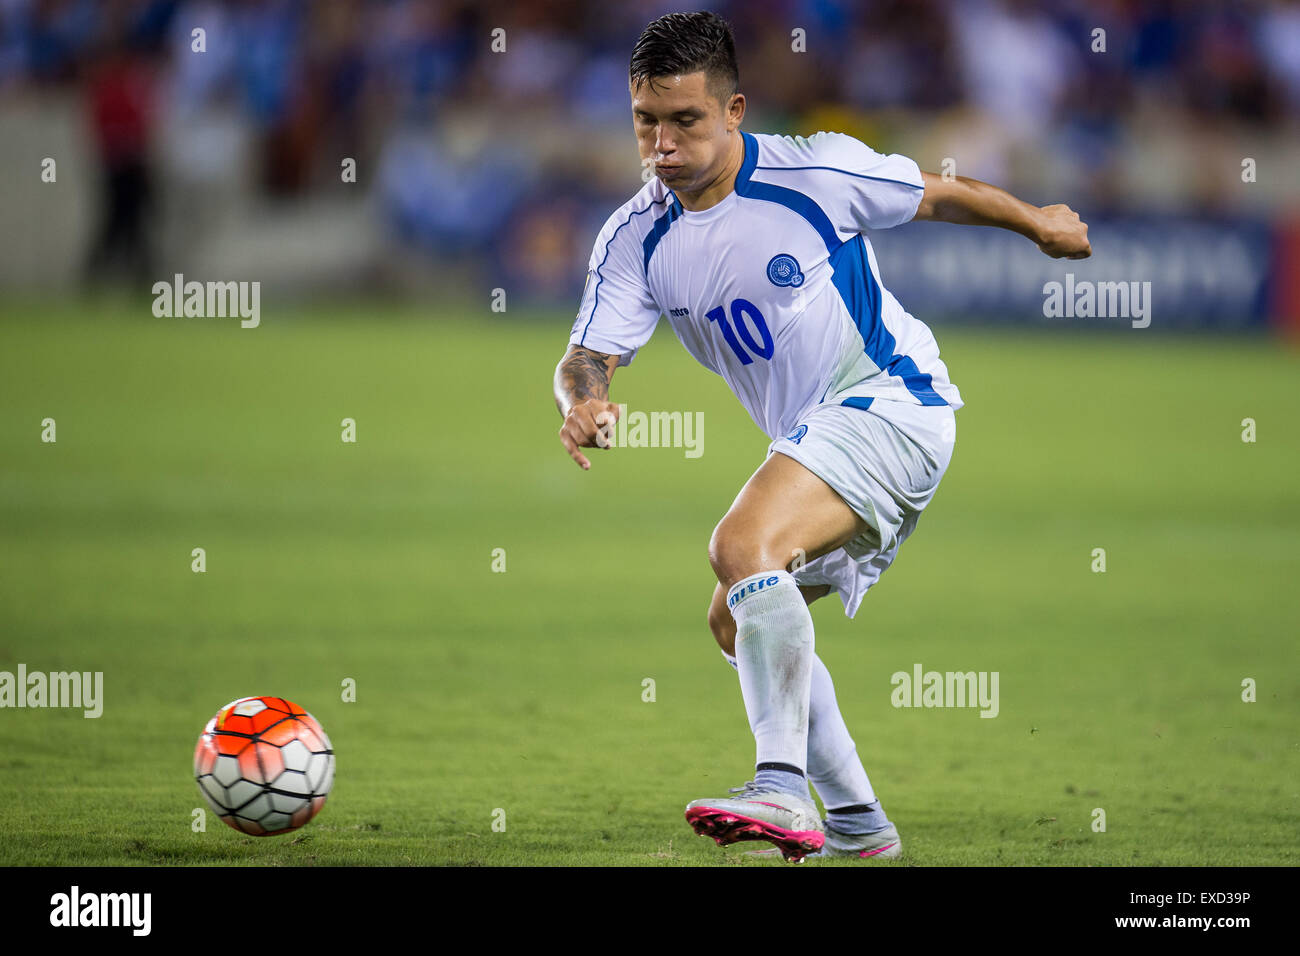 July 11, 2015: El Salvador midfielder Jaime Alas (10) controls the ball during the 2nd half of an international CONCACAF Gold Cup soccer match between Costa Rica and El Salvador at BBVA Compass Stadium in Houston, TX. The game ended in a 1-1 draw. Credit:  Cal Sport Media/Alamy Live News Stock Photo